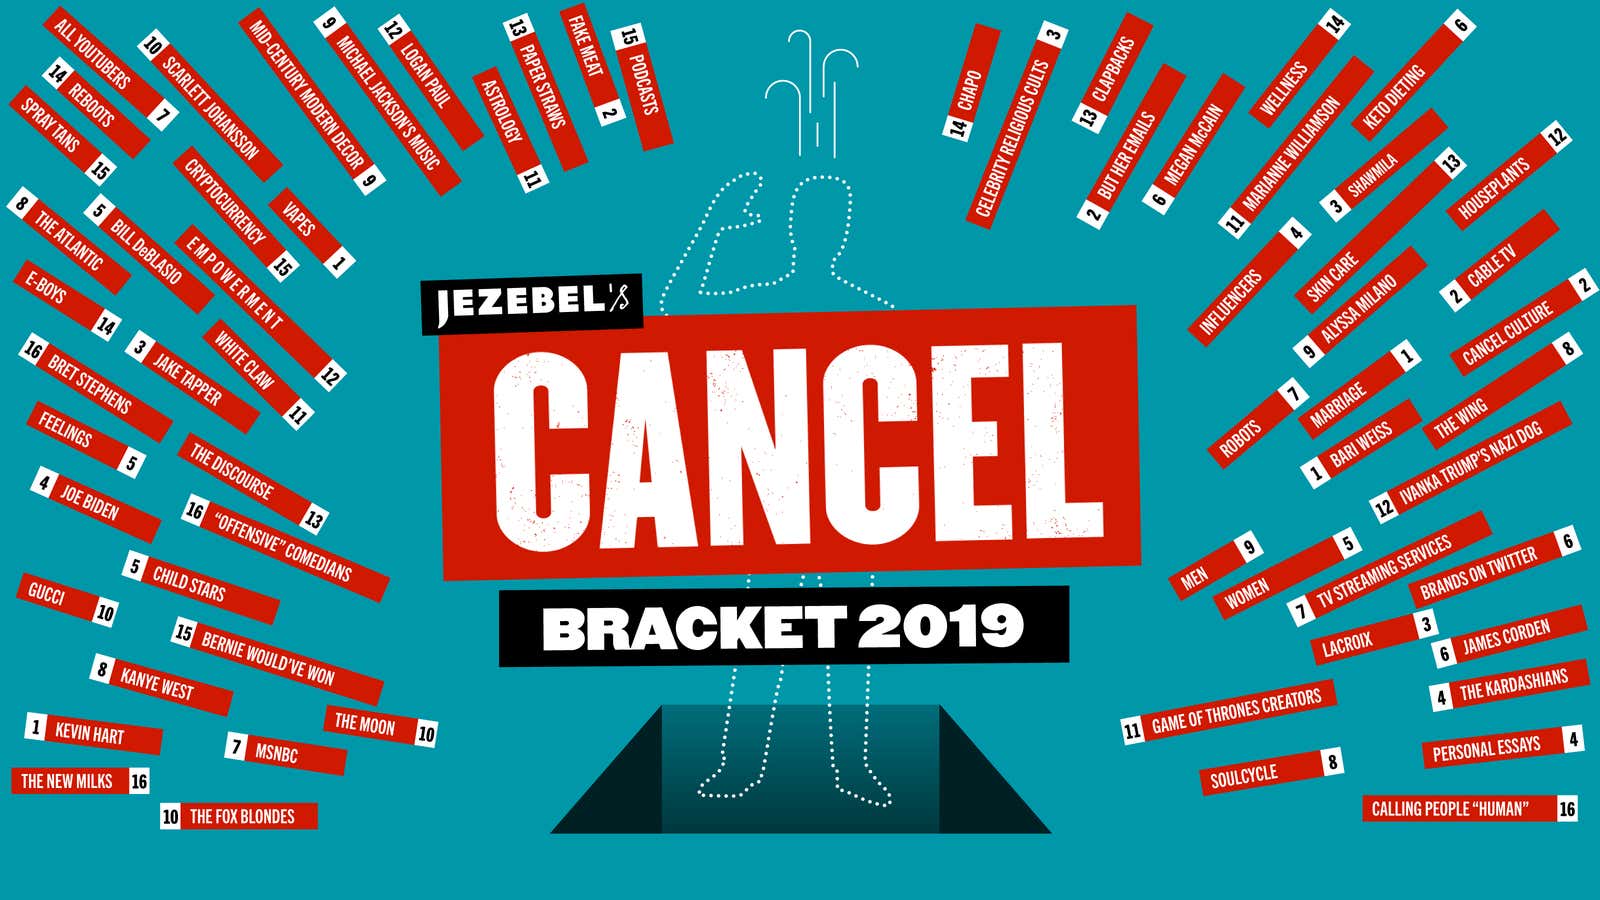 How Much Longer Must We Endure Men and Influencers? Jezebel's Cancel Tournament Continues